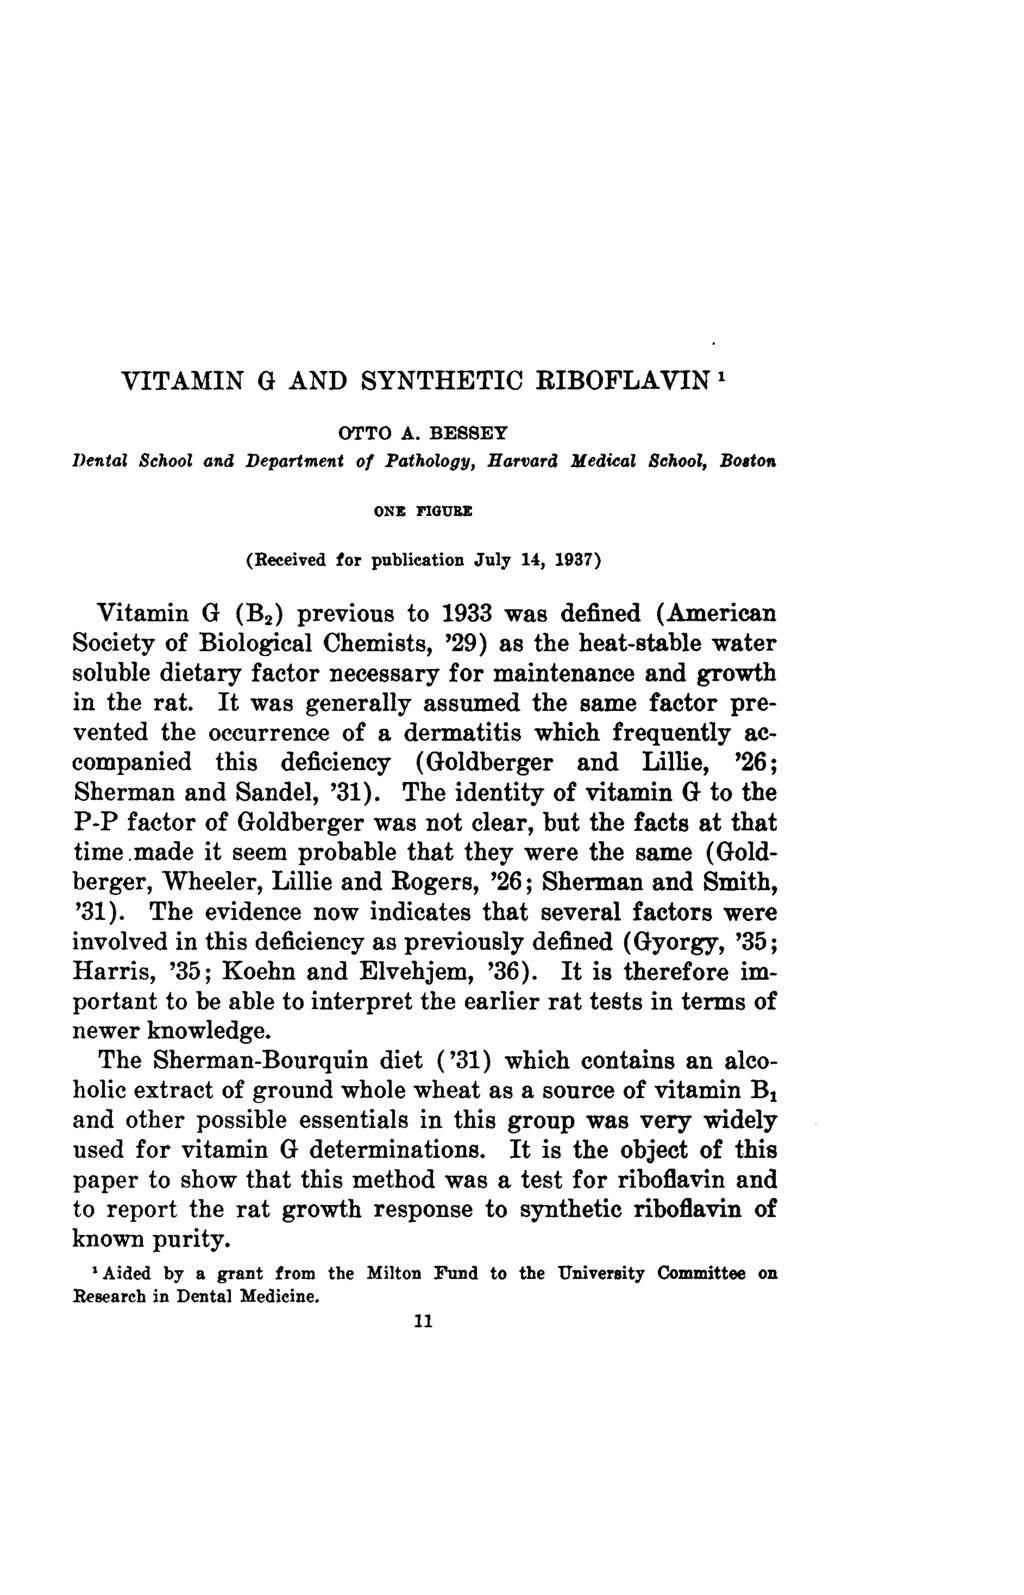 VITAMIN G AND SYNTHETIC RIBOFLAVIN * OTTO A.